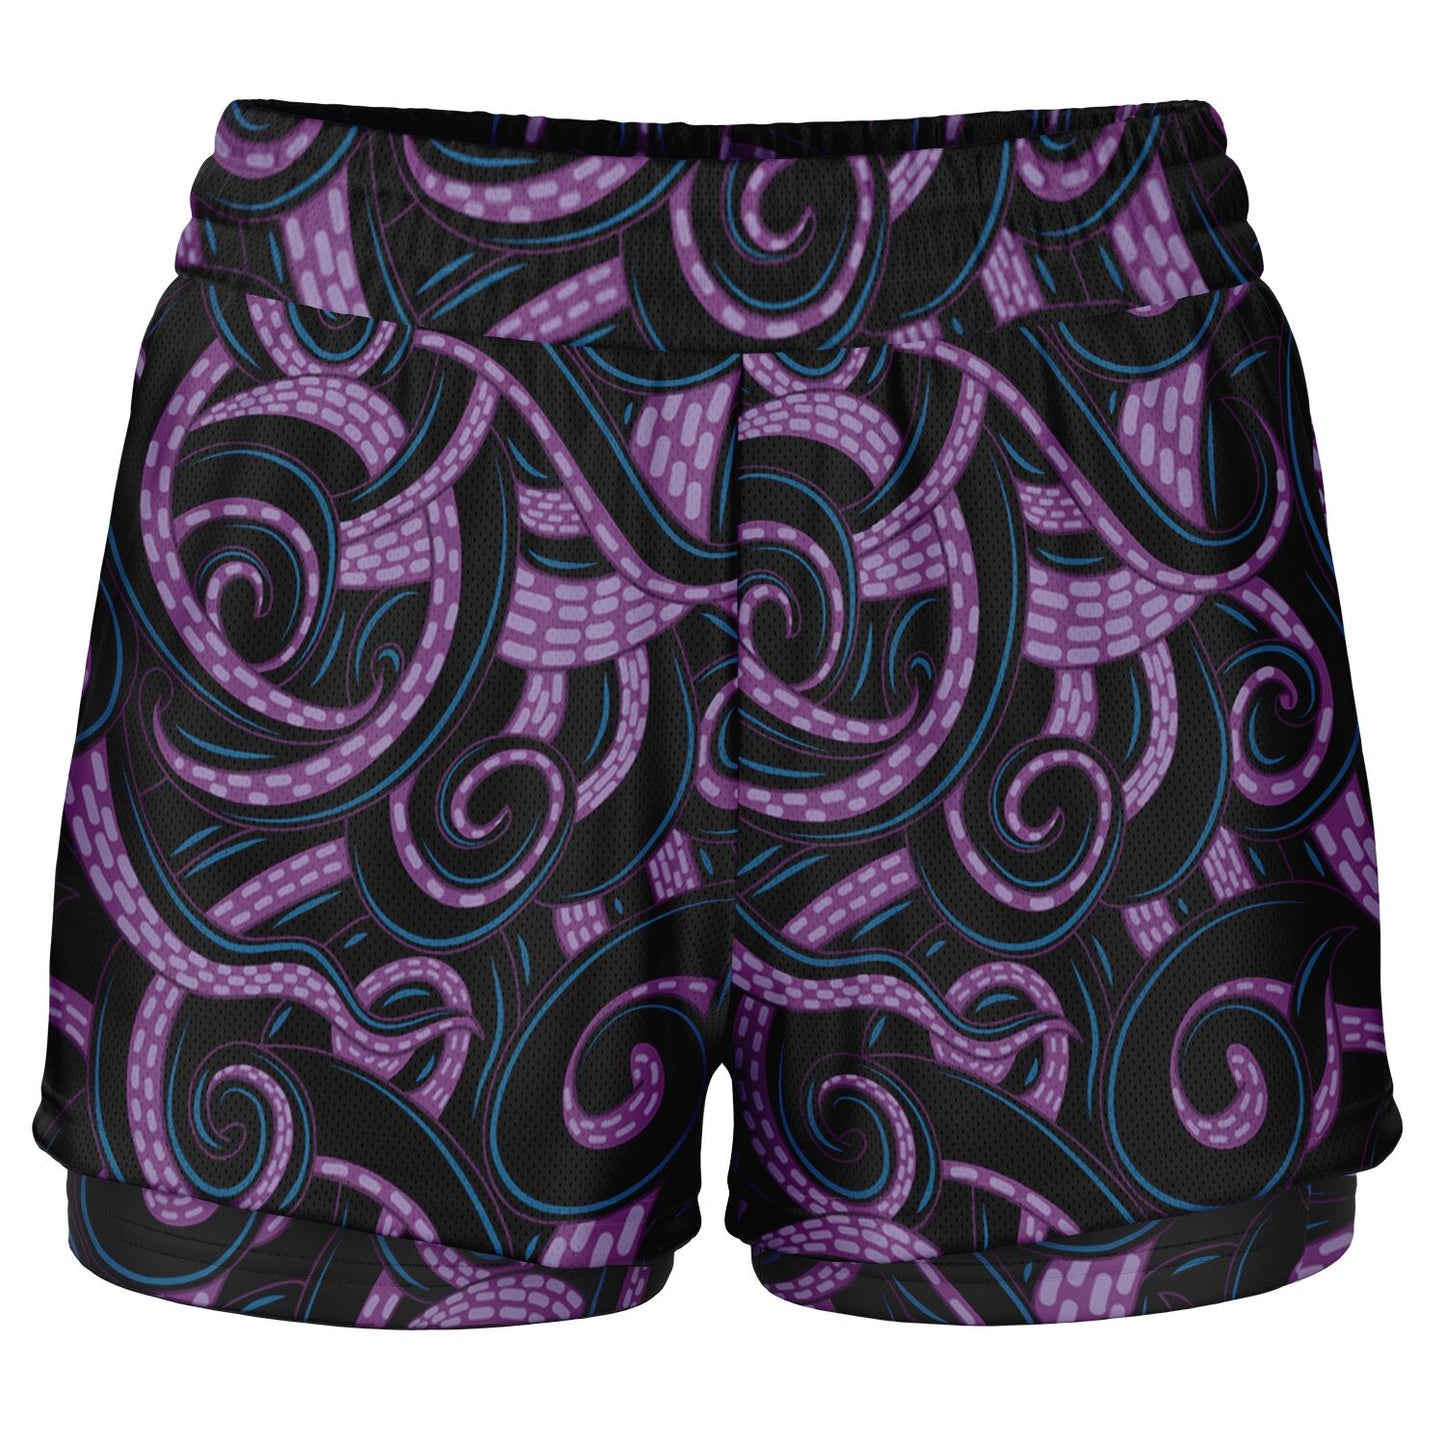 Ursula Tentacles 2-in-1 Shorts